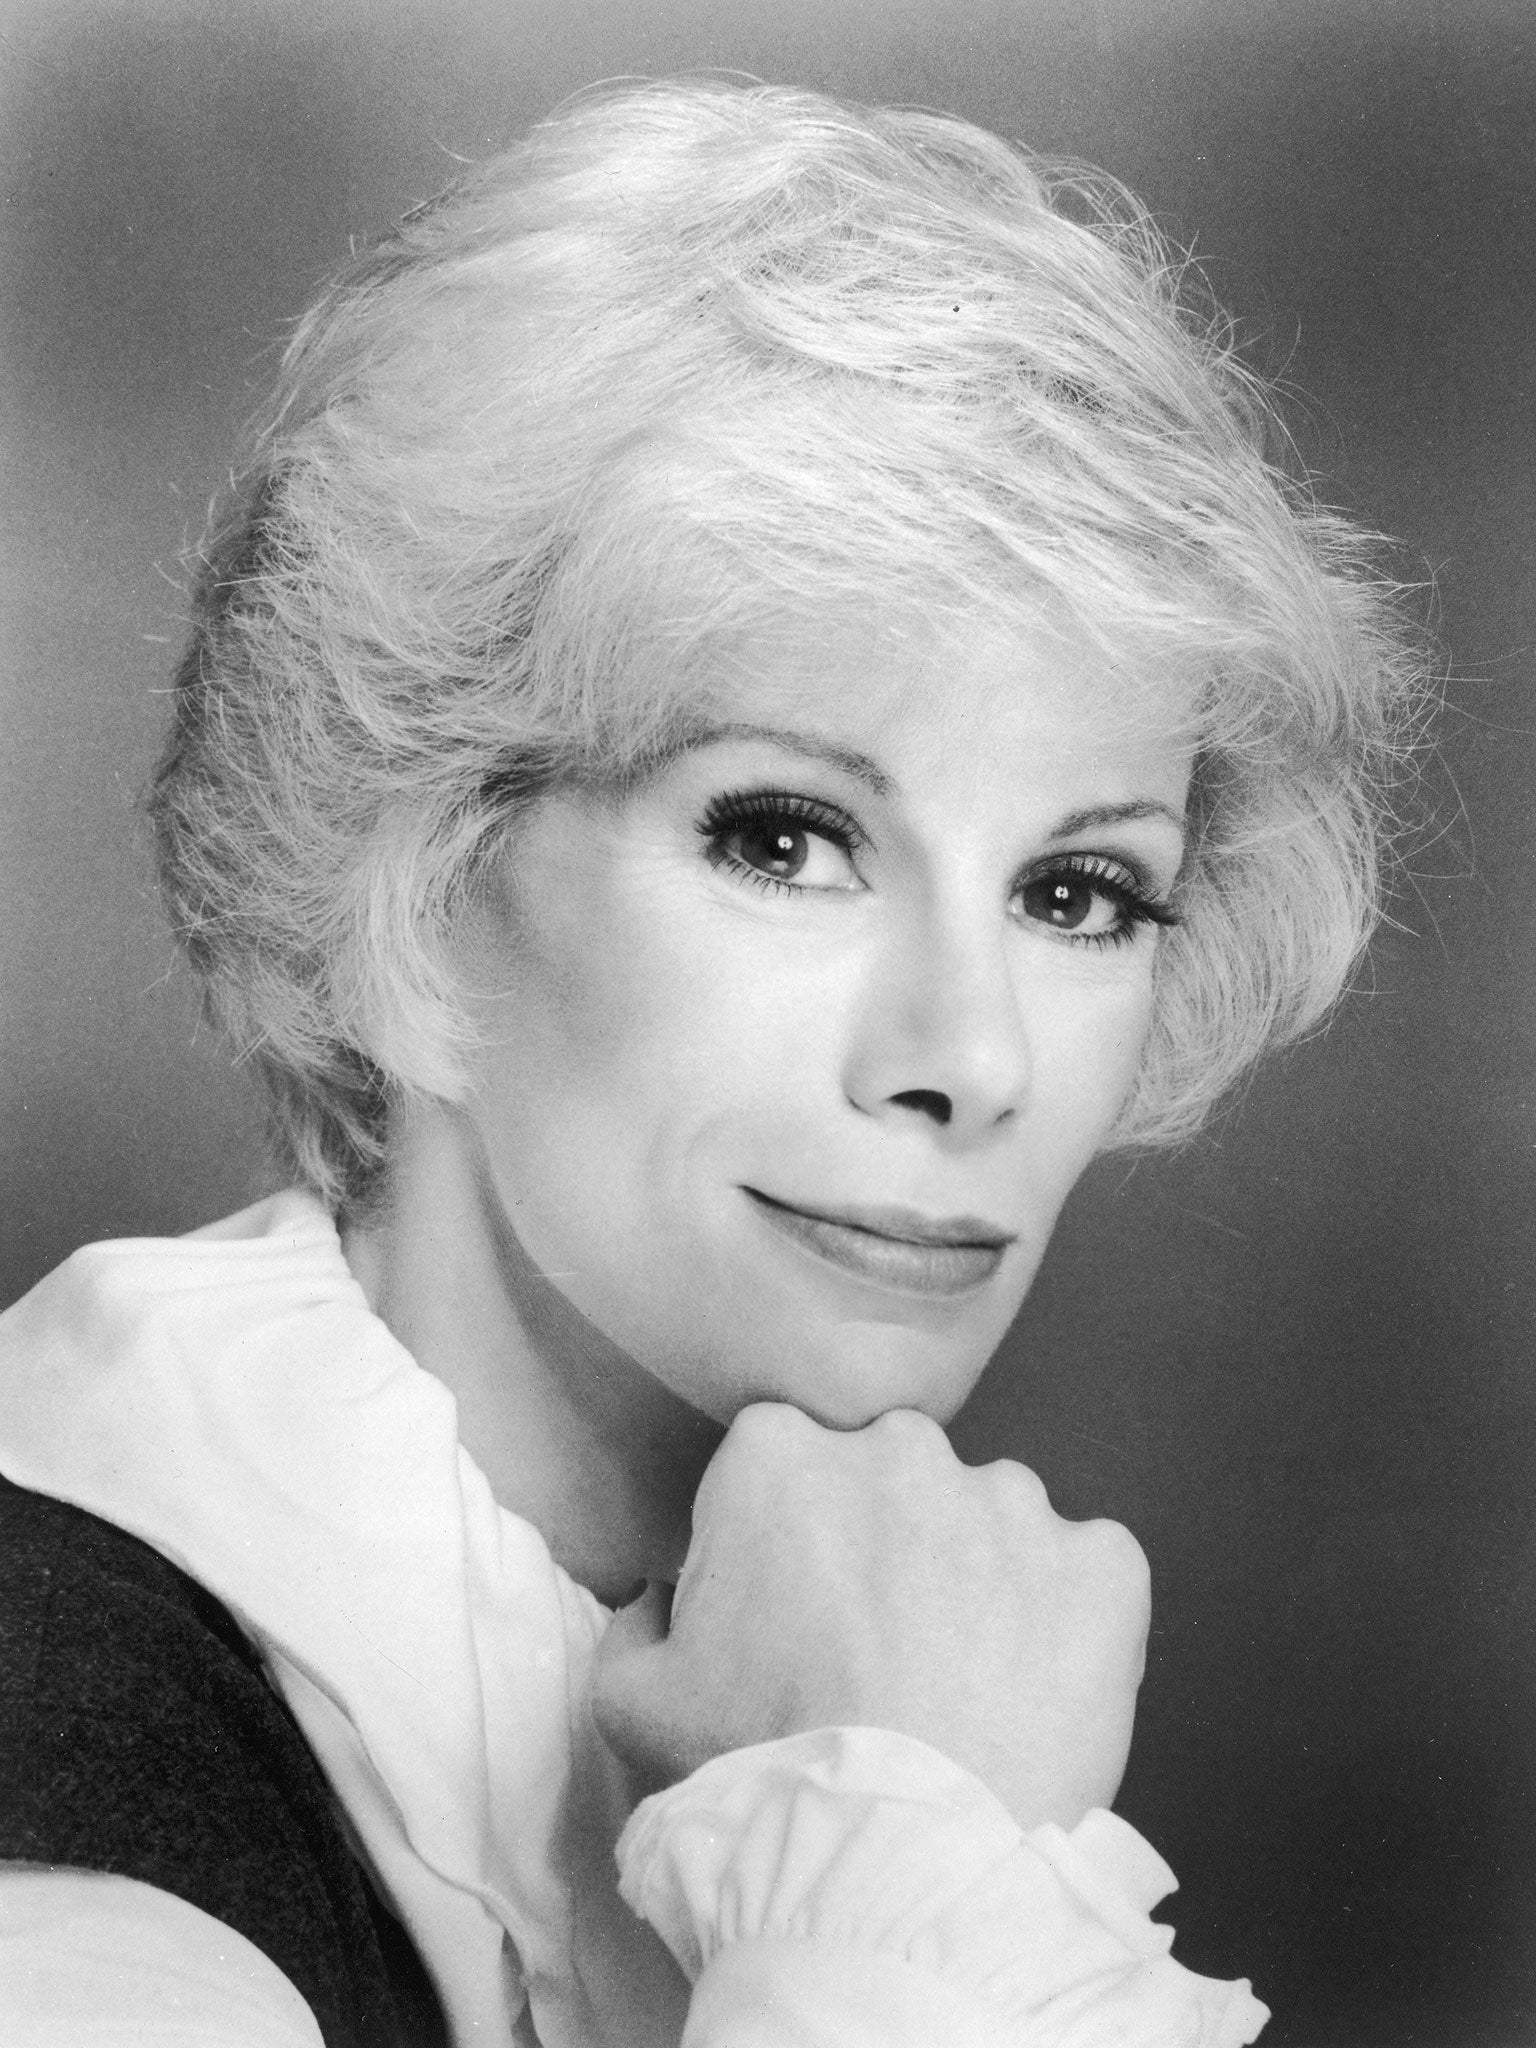 Joan Rivers in the 1960s, at the time she was performing in comedy clubs in New York